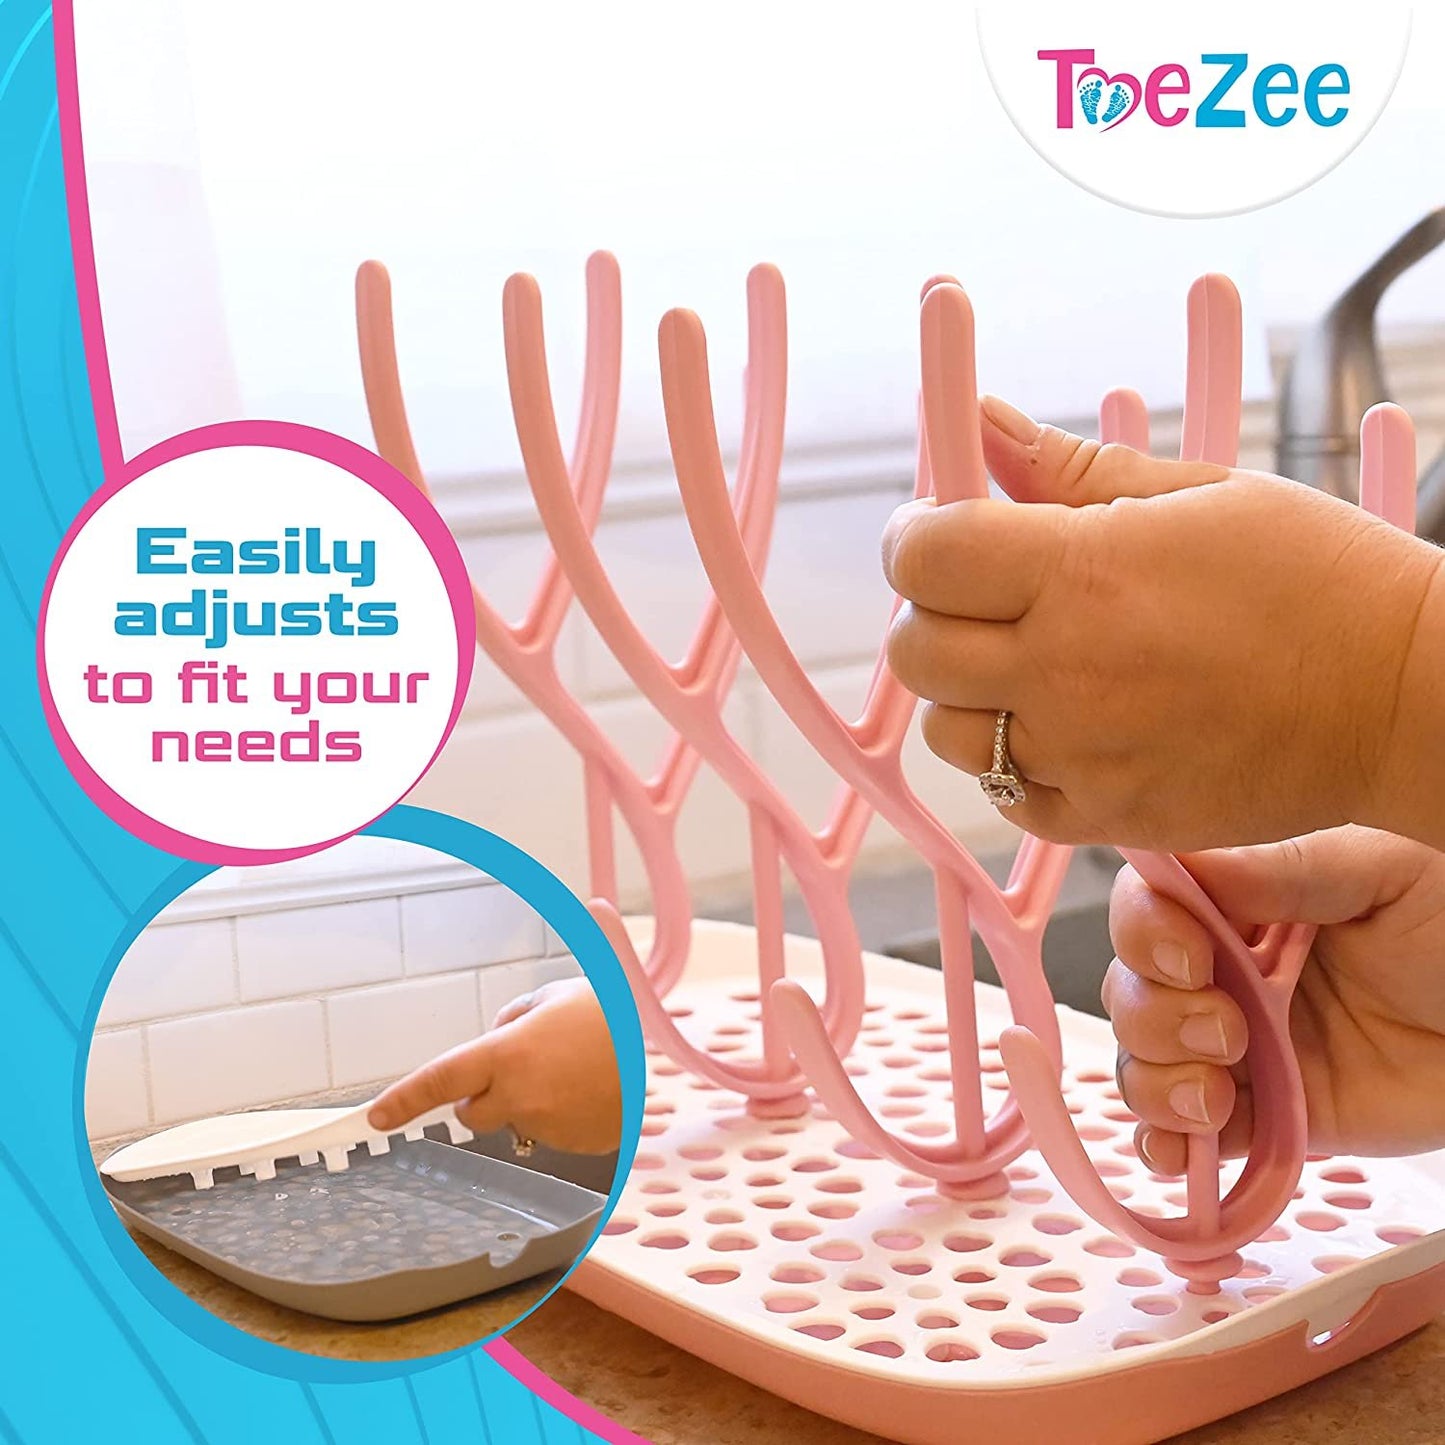 ToeZee Baby Bottle Drying Rack Space Saving Countertop Baby Bottle Holder, Drying Rack for Baby Bottles Accessories - Stores Up to 12 Bottles, Dishwasher Safe (Pink)